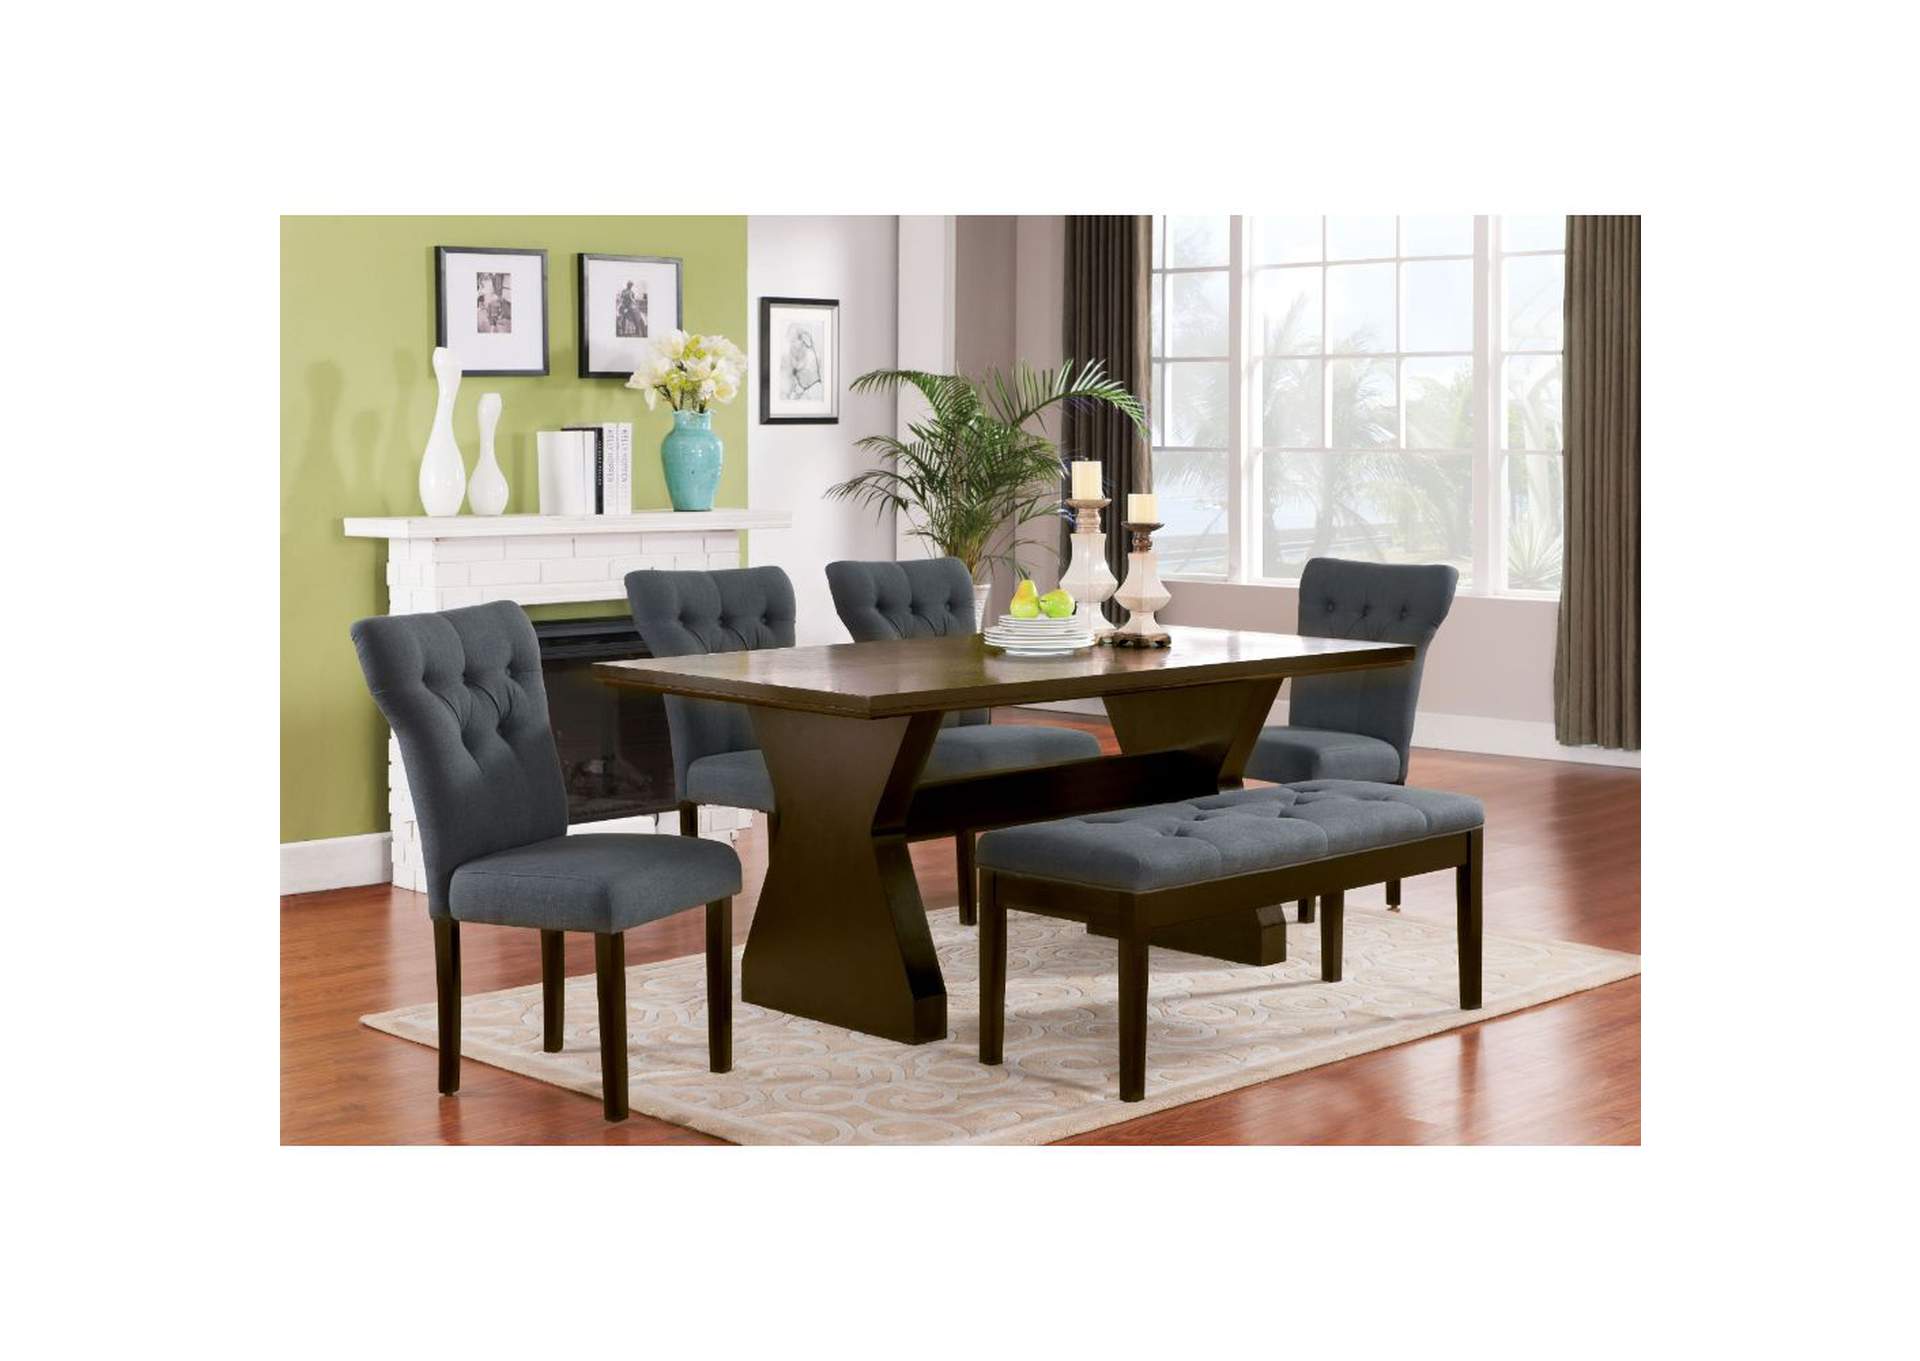 Effie Dining Table,Acme